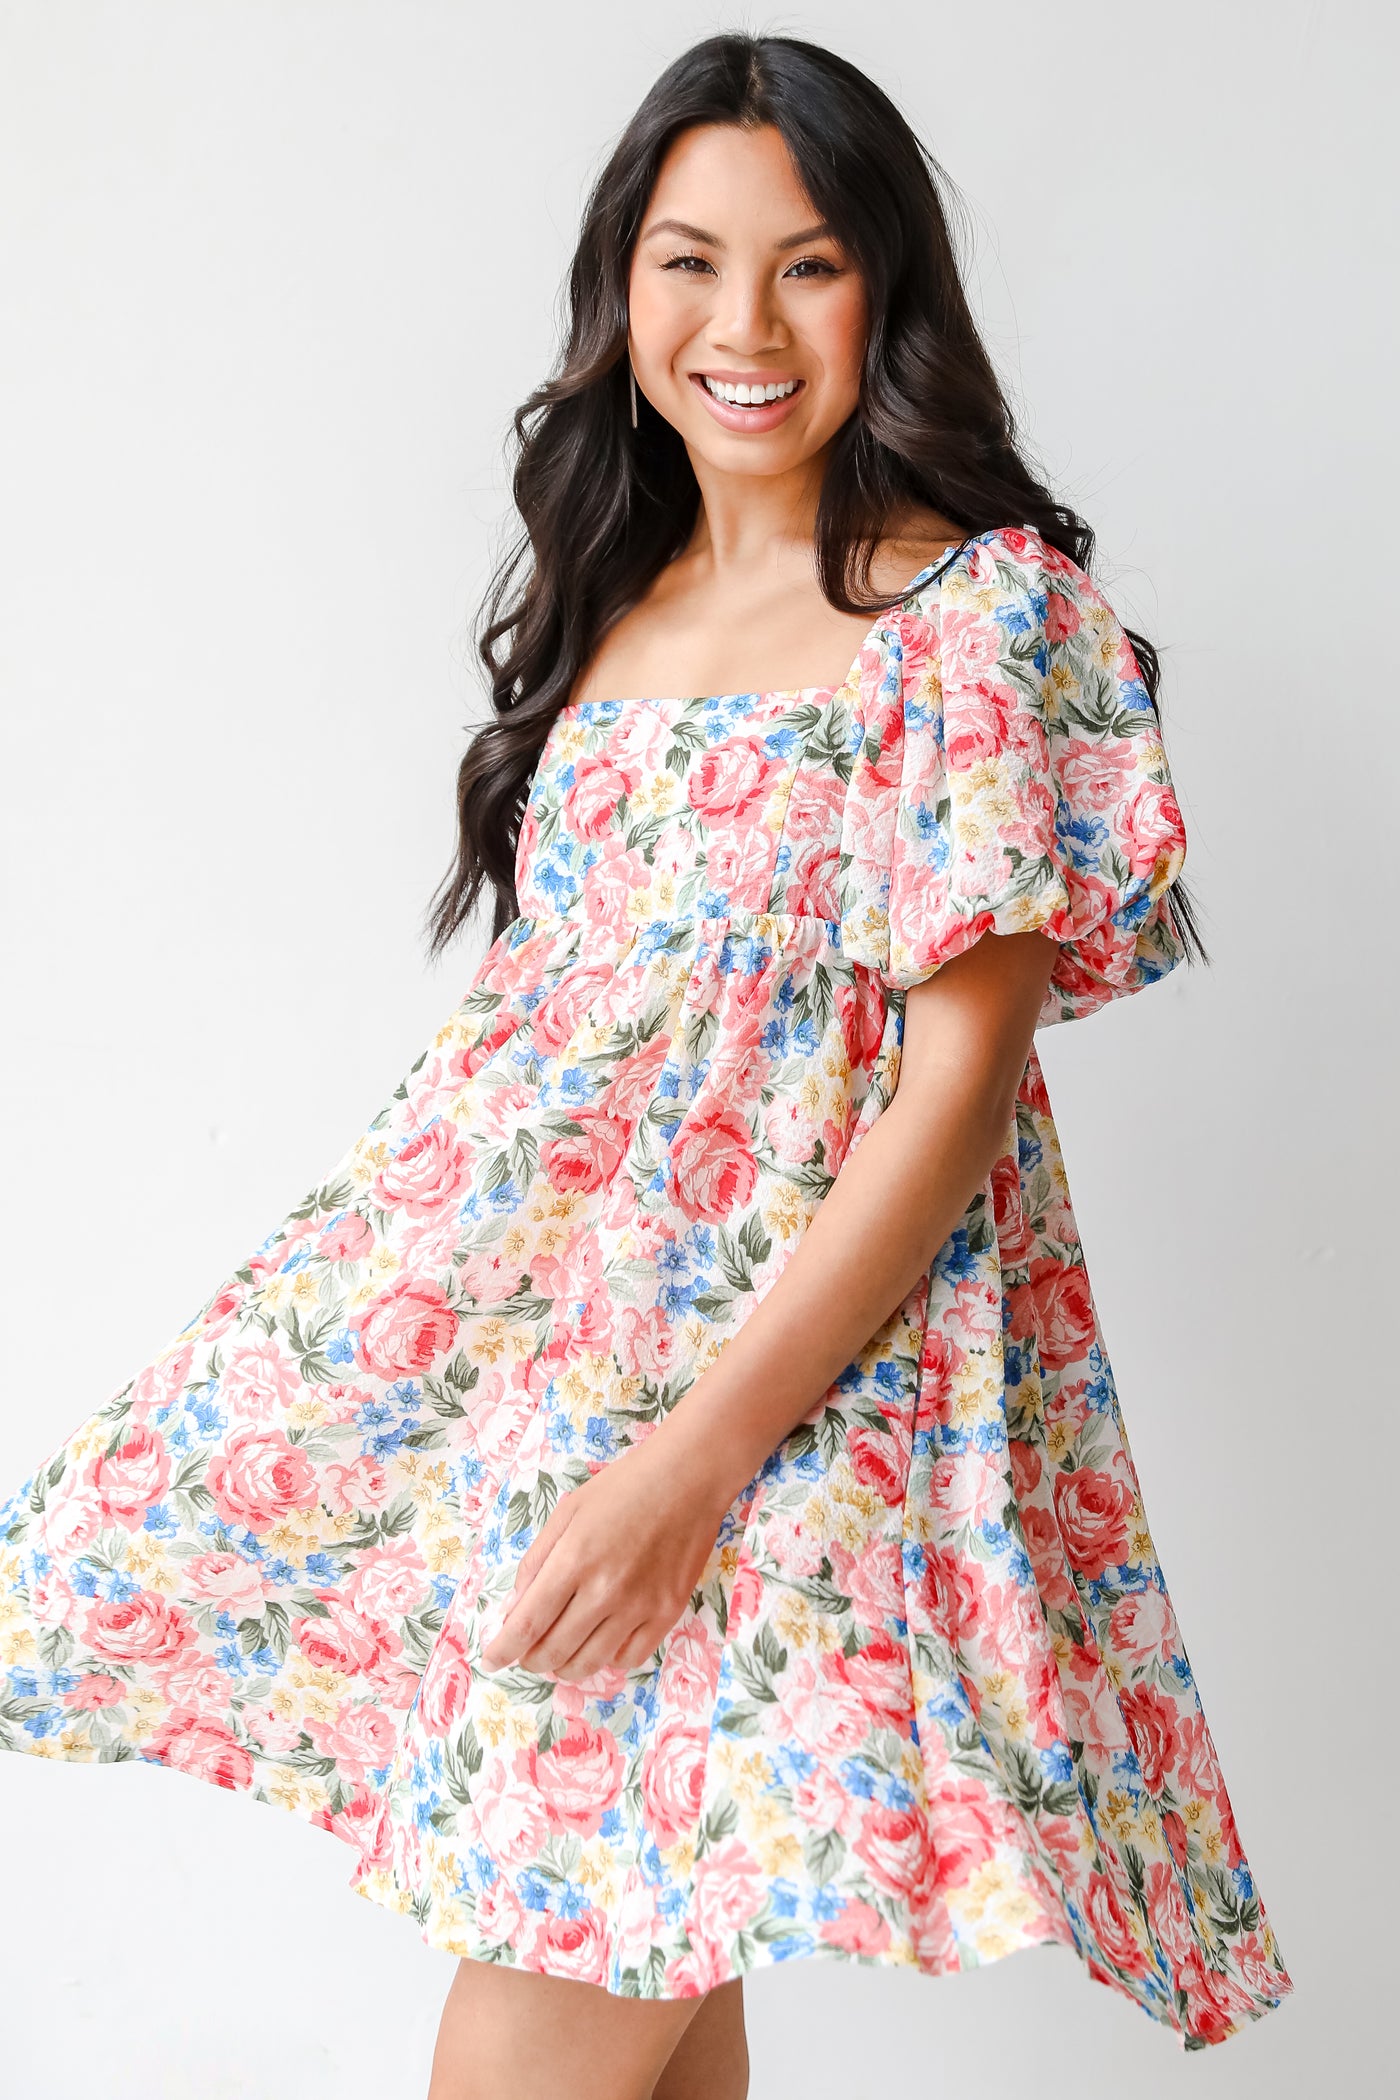 Floral Babydoll Mini Dress in pink from dress up